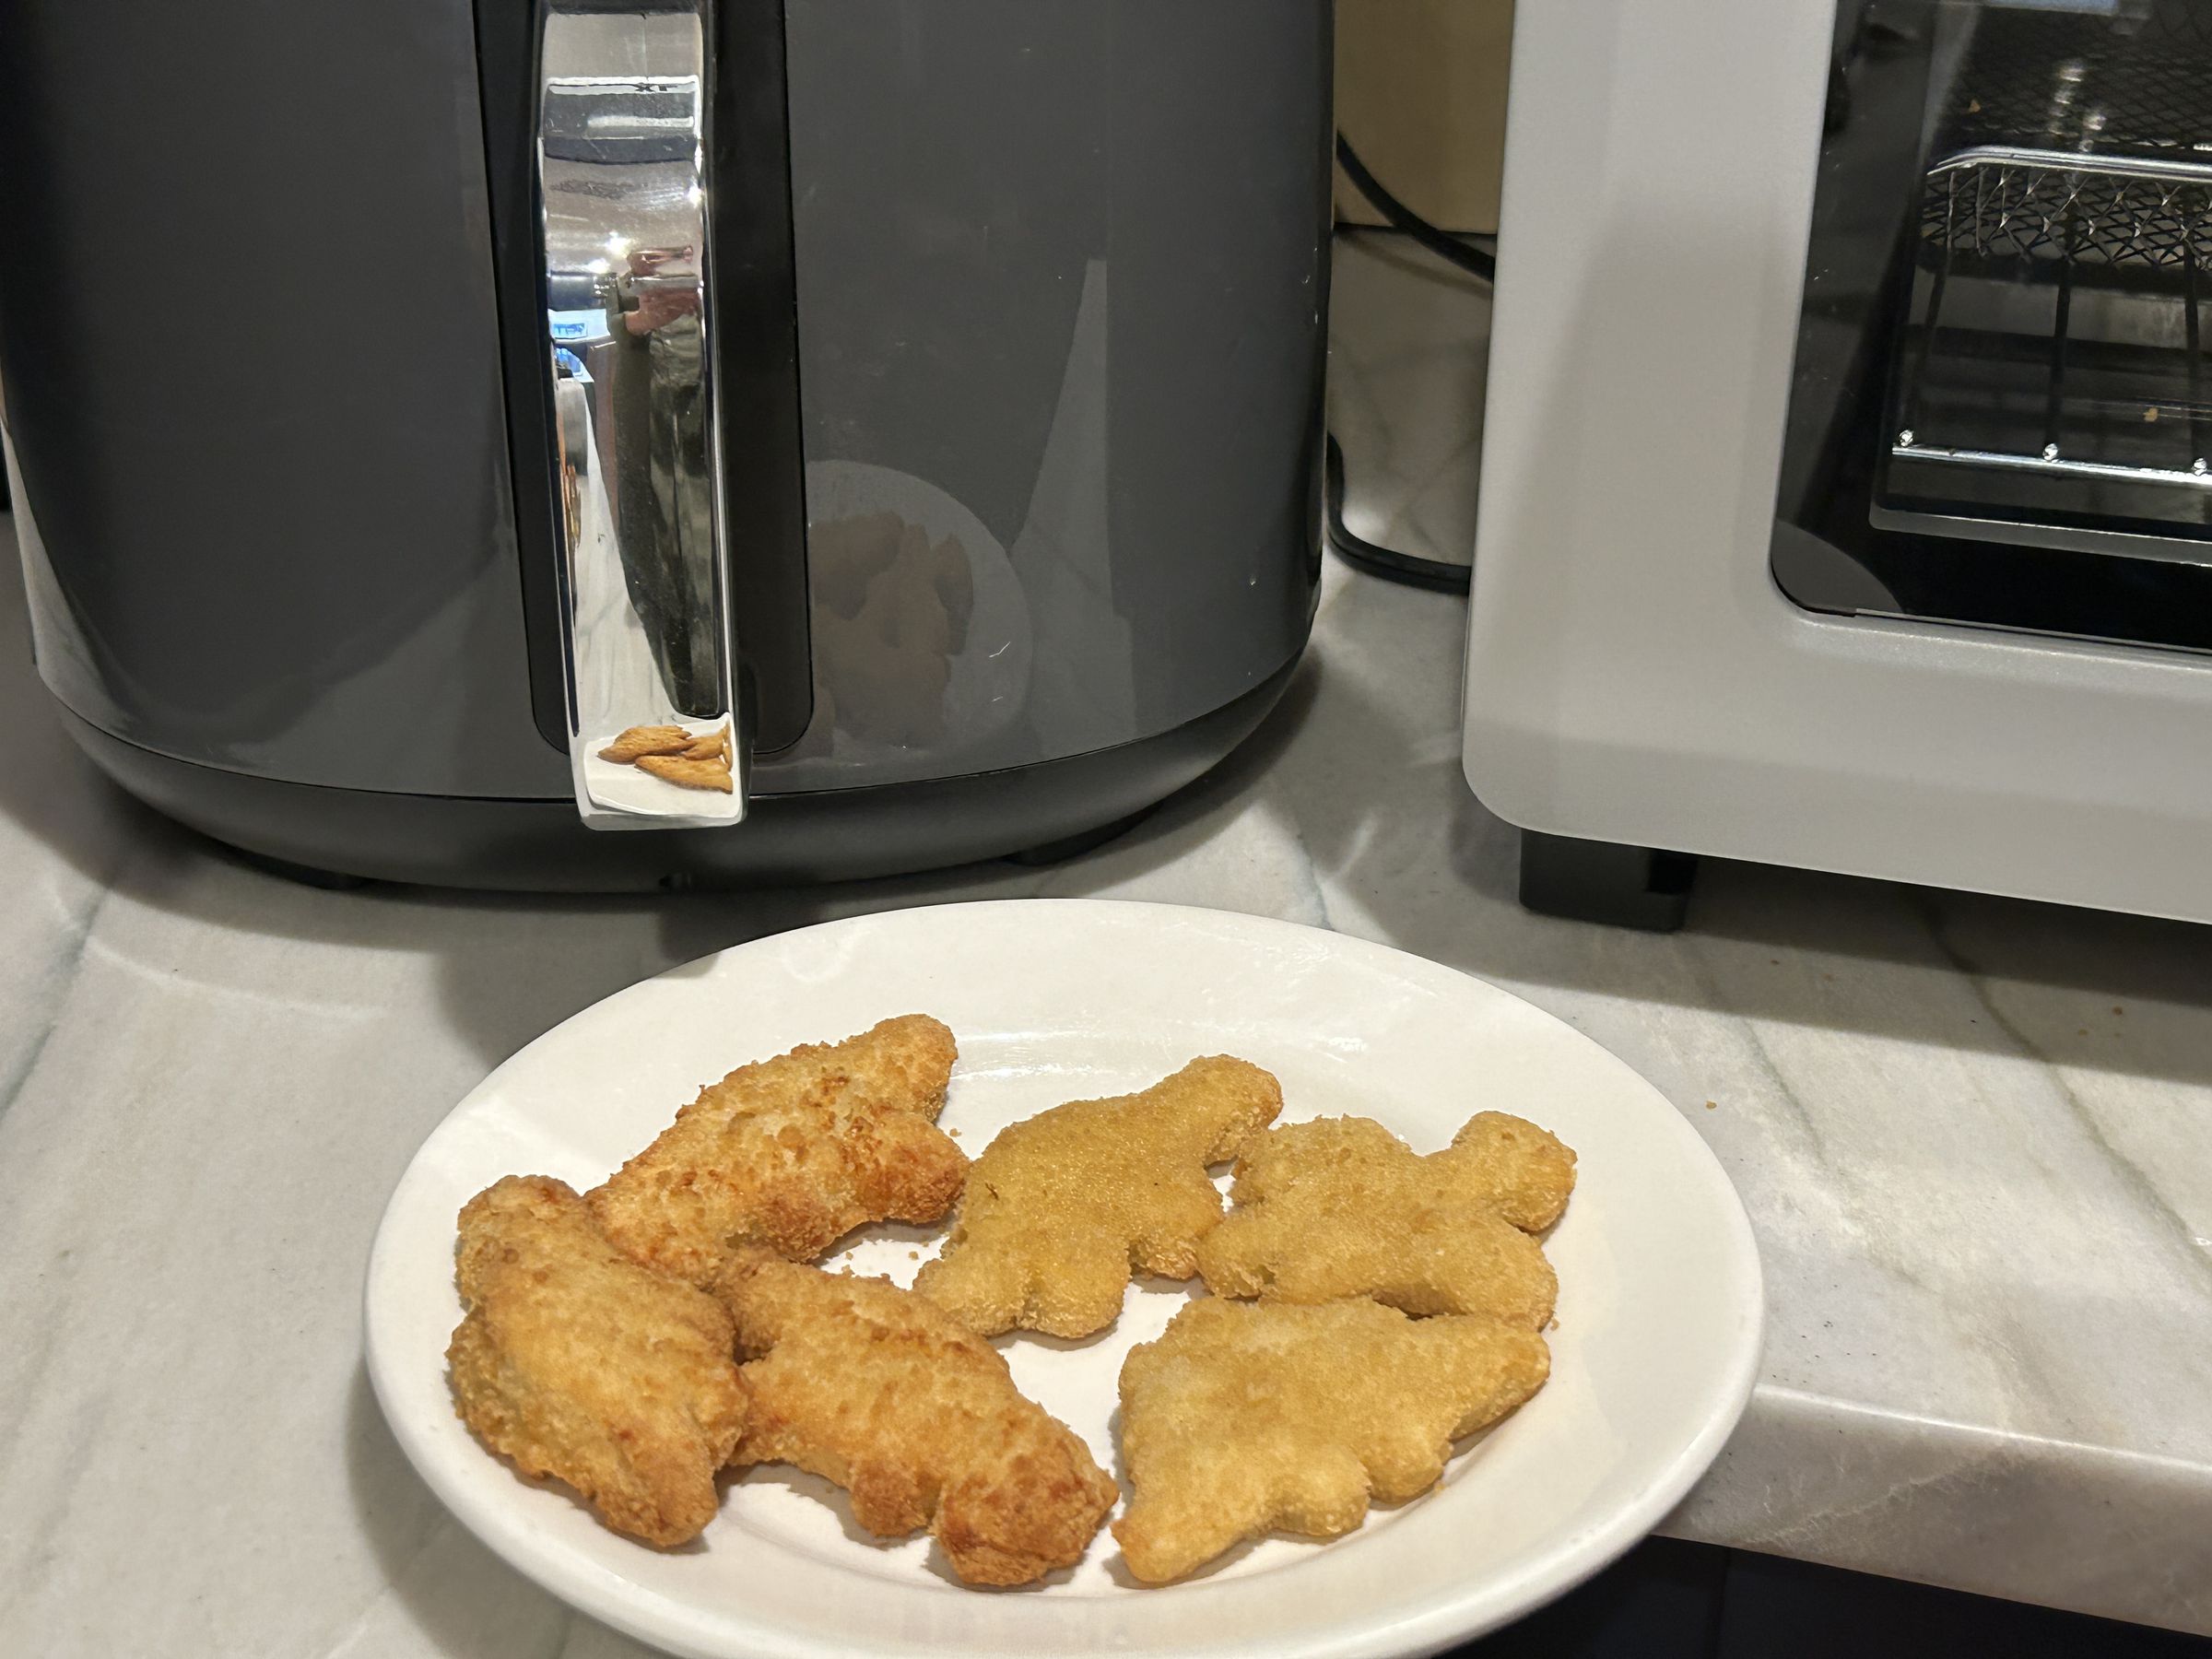 The Tovala’s air fryer mode was no match for my Ninja. The nuggets on the right were from the Tovala, and the ones on the left were from the Ninja.